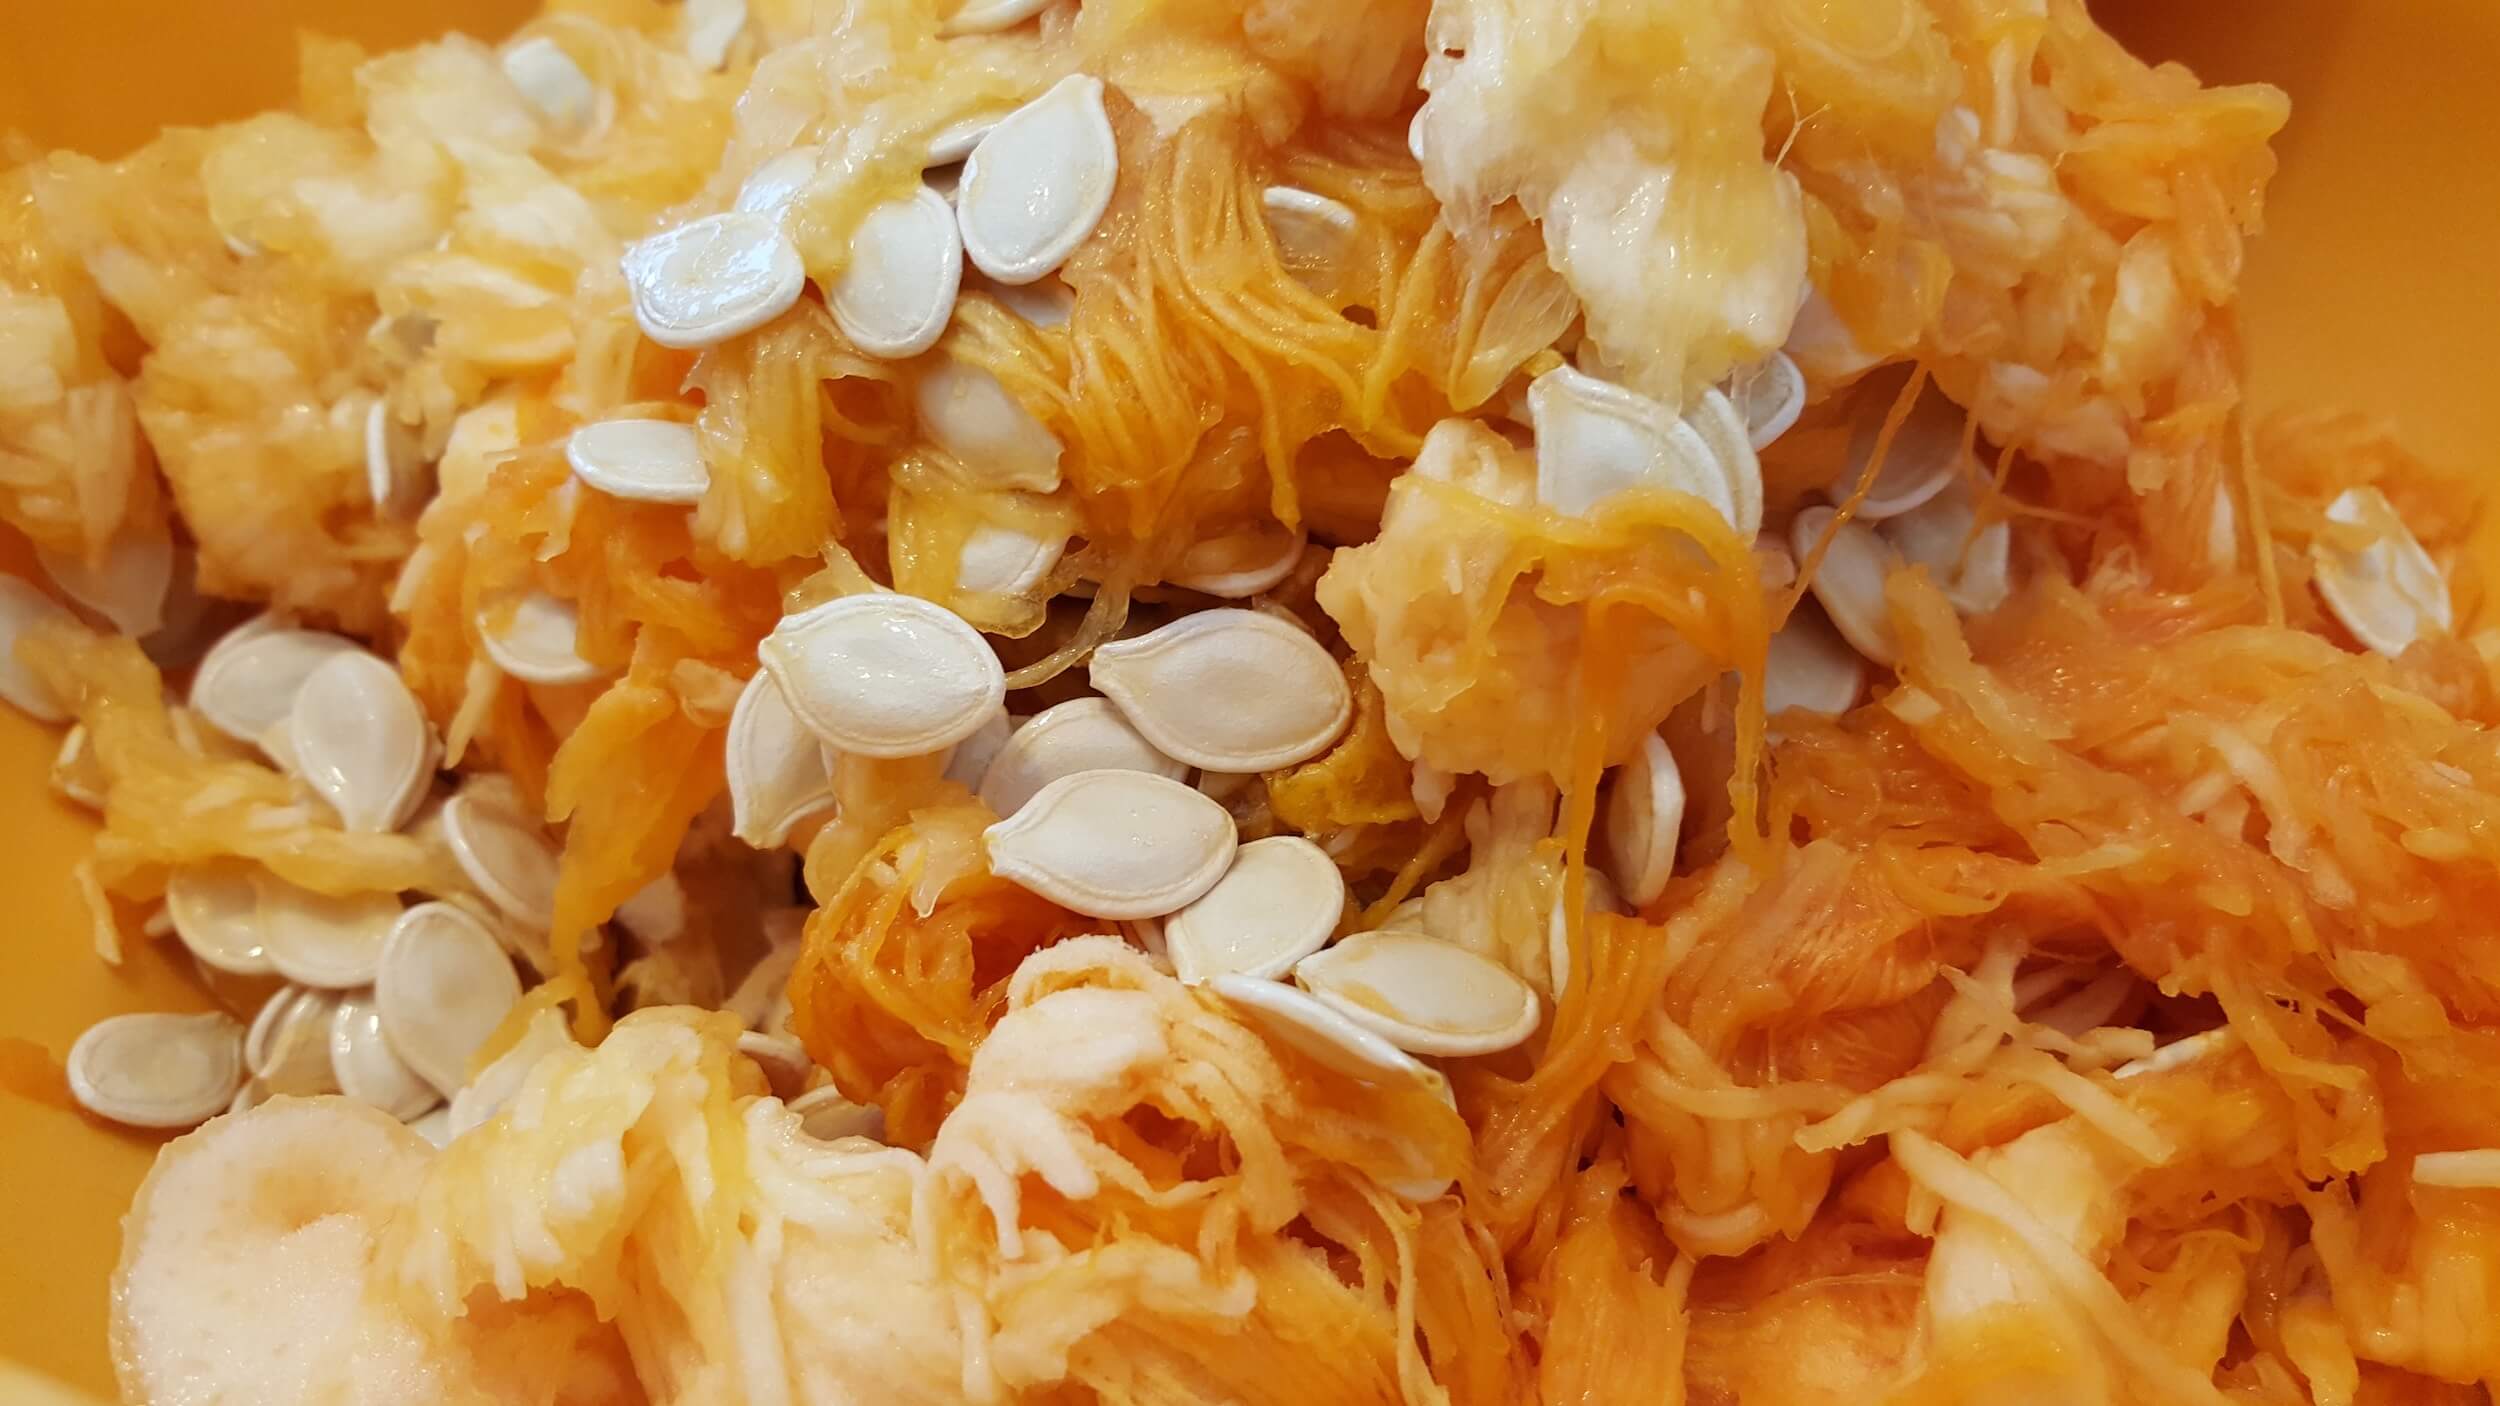 Delicious pumpkin seed recipe for the fall season. Microwave or baked pumpkin seeds.